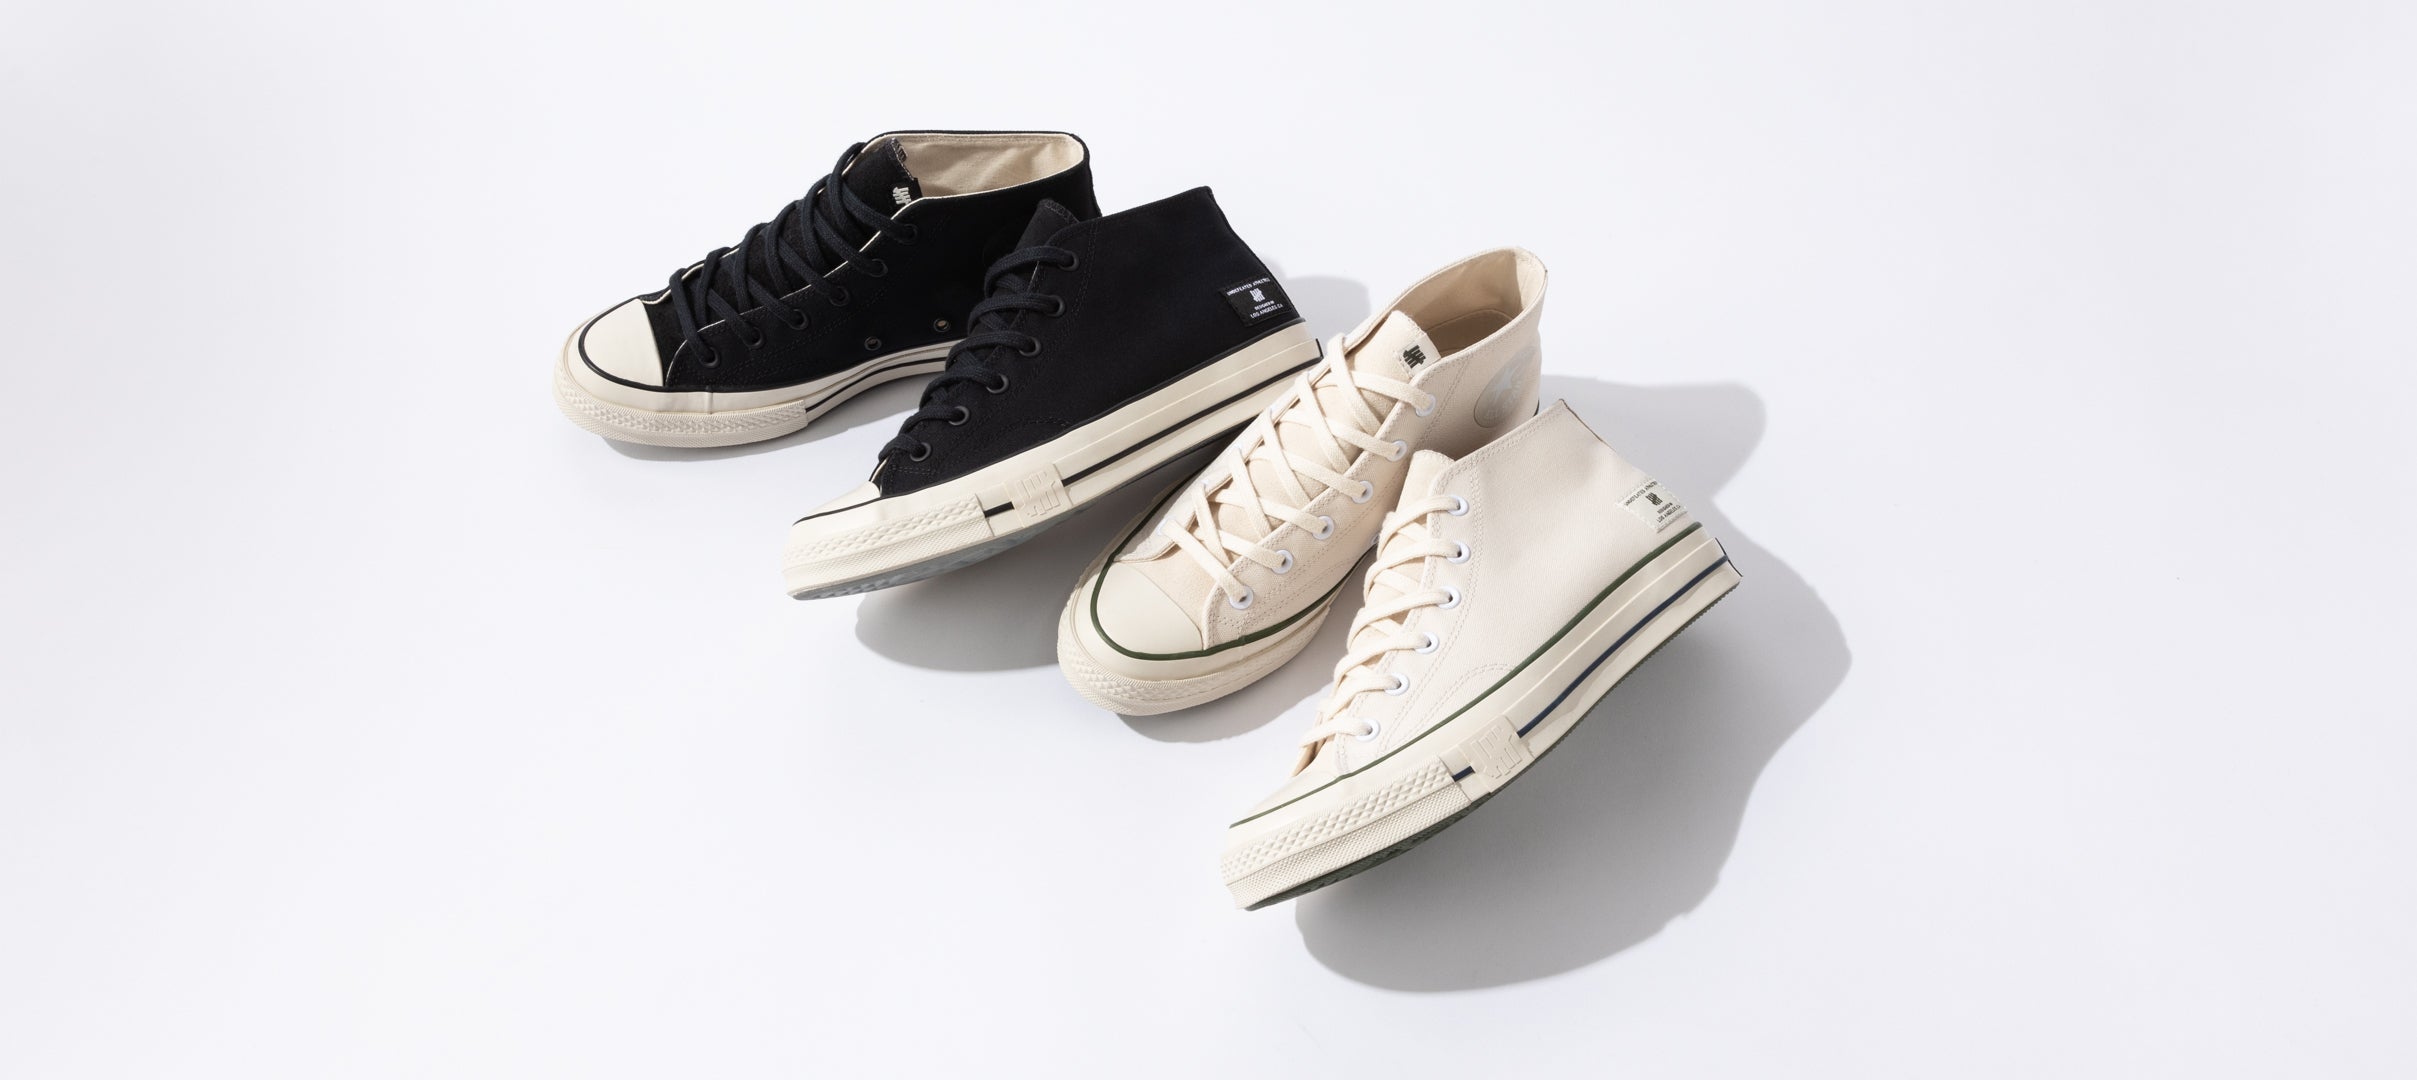 UNDEFEATED X CONVERSE CHUCK 70 Undefeated